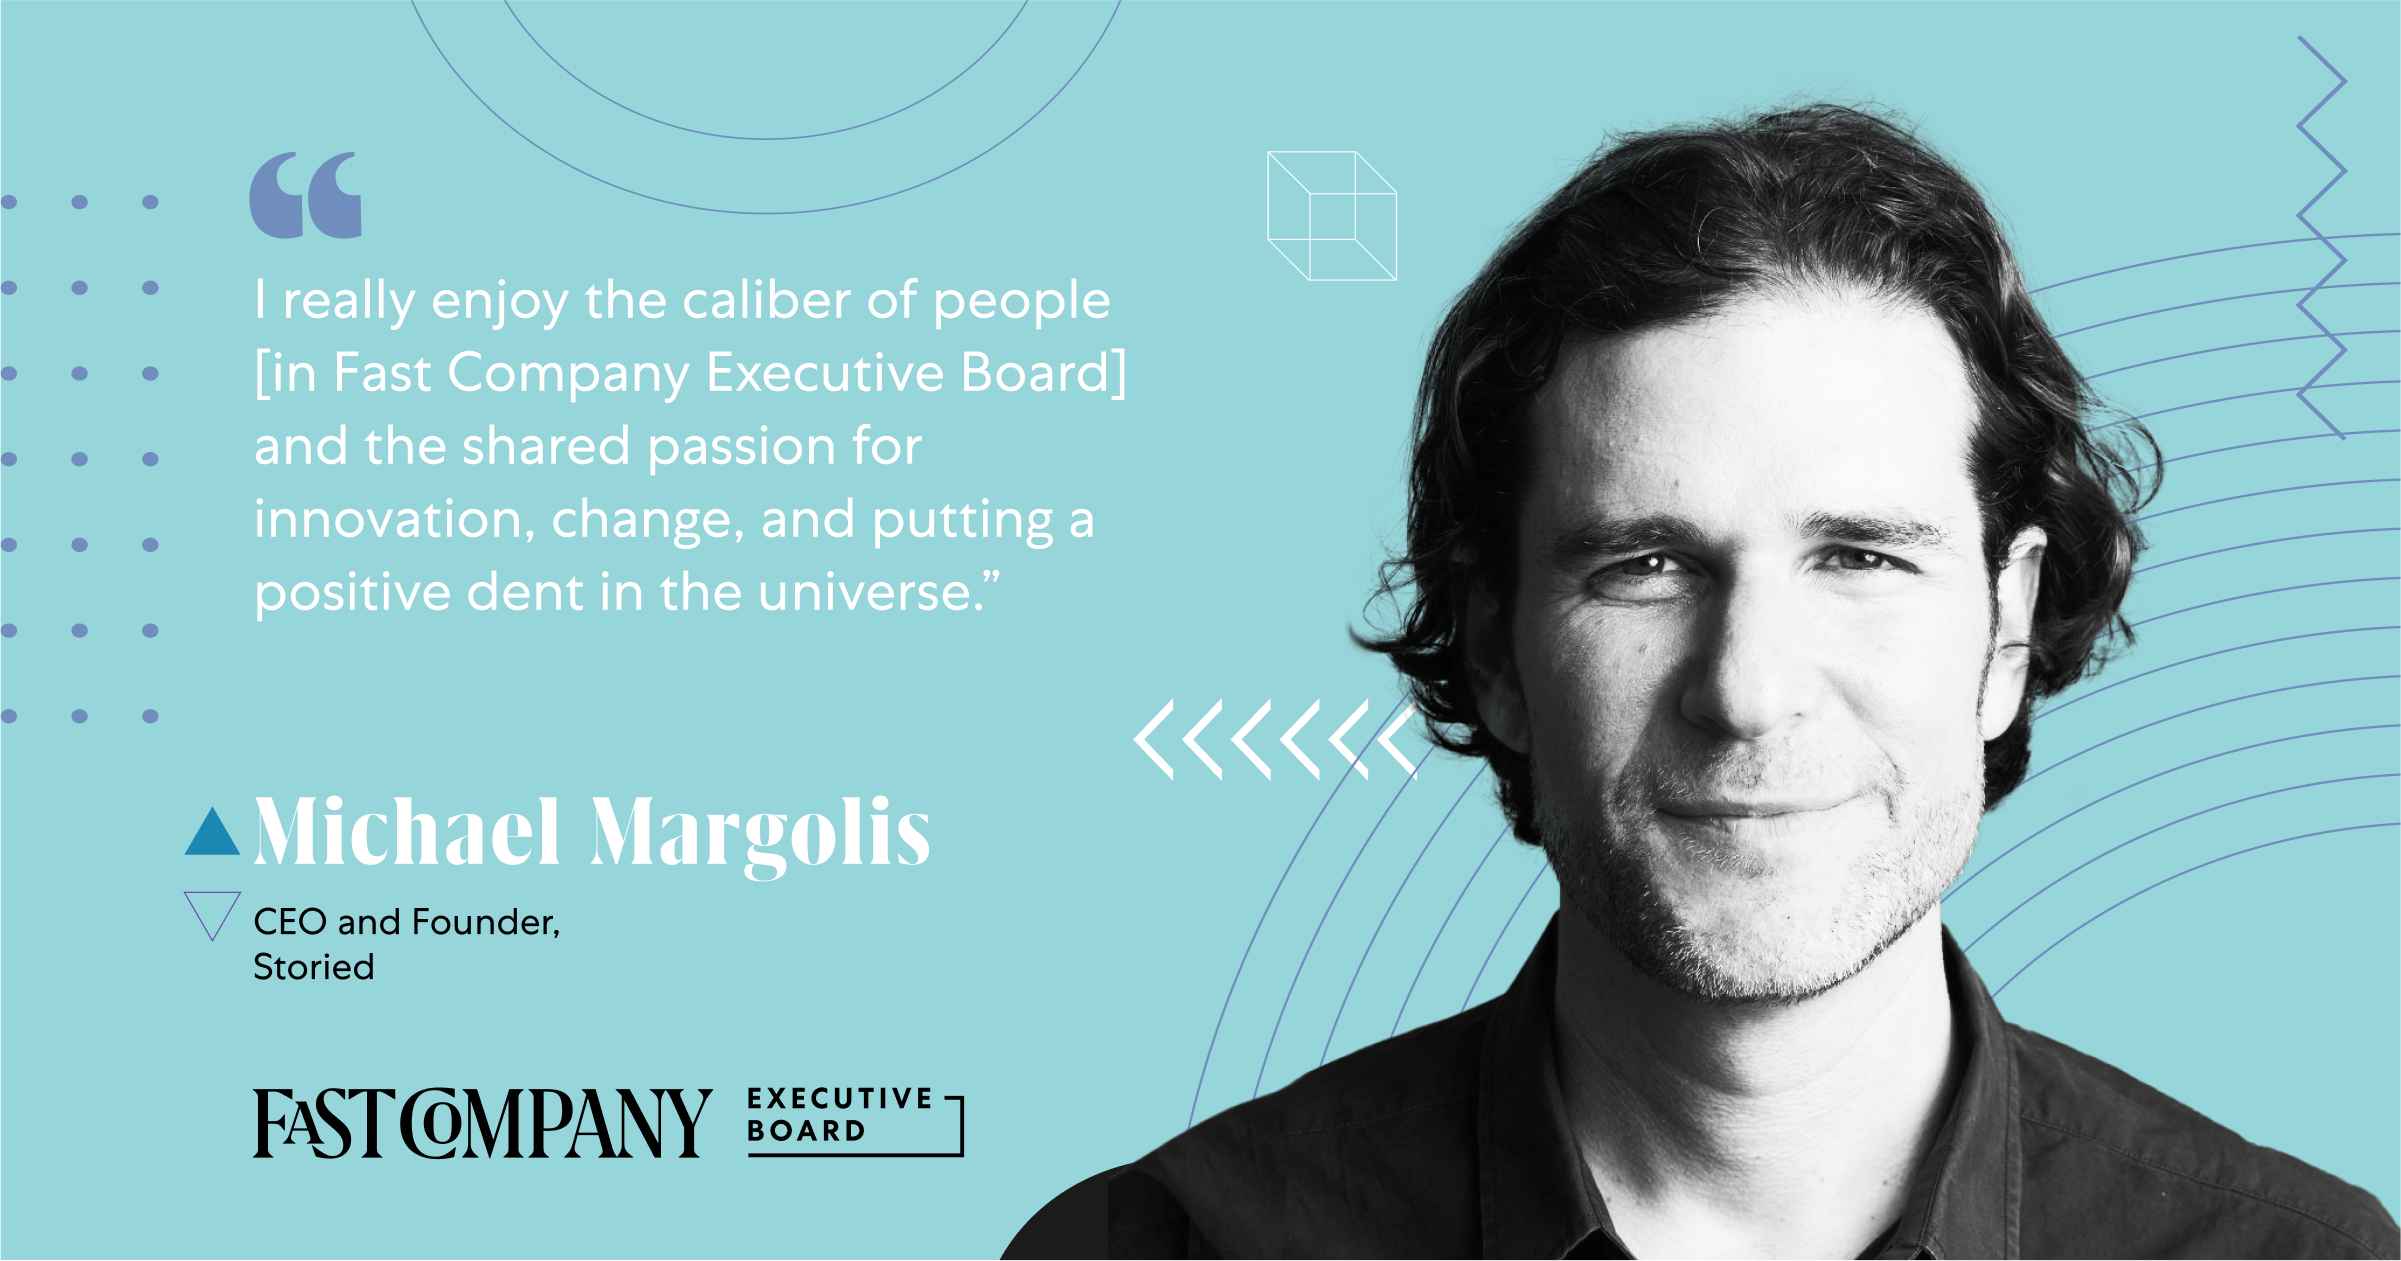 Michael Margolis Says Fast Company Executive Board Attracts Members With a Shared Passion for Innovation